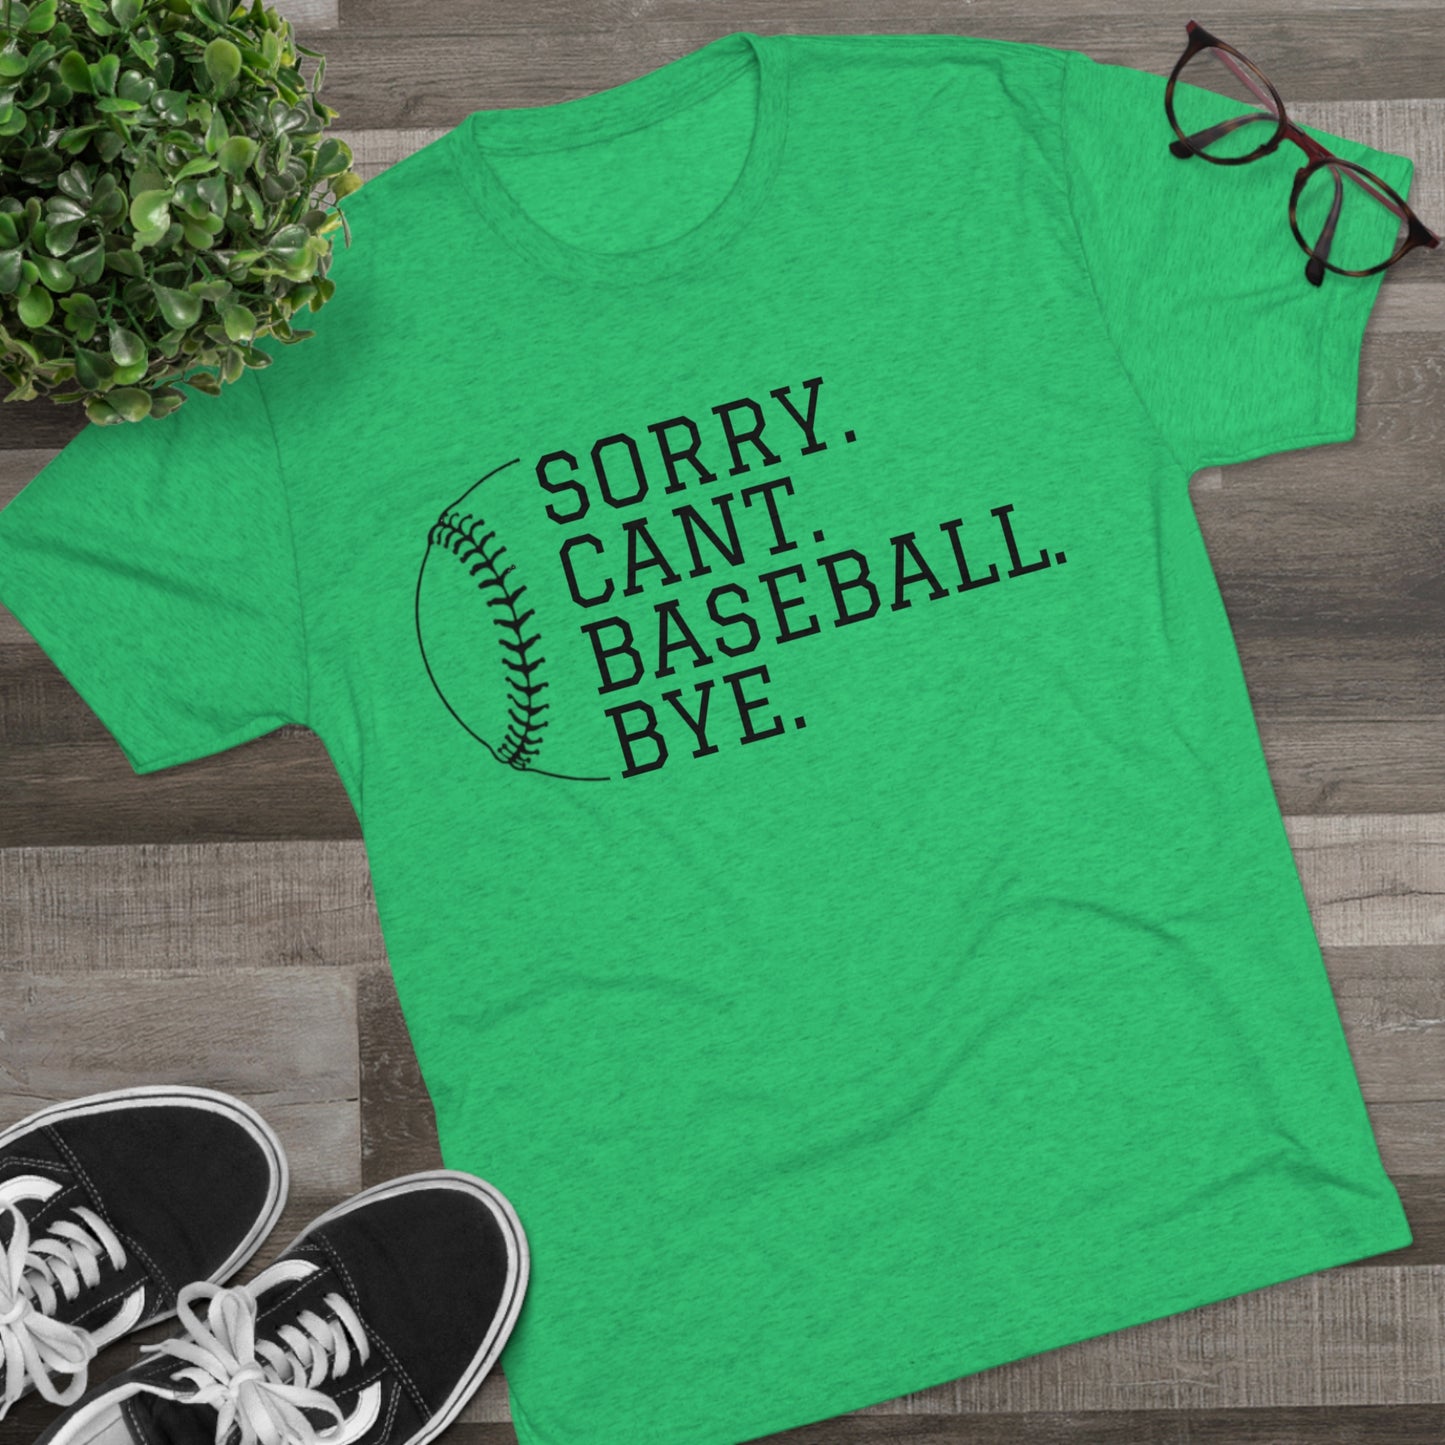 Sorry. Cant. Baseball. Bye.  Tri-Blend Tee: Unbelievably Soft Comfort with a Stylish Edge - Perfect for Baseball Enthusiasts!